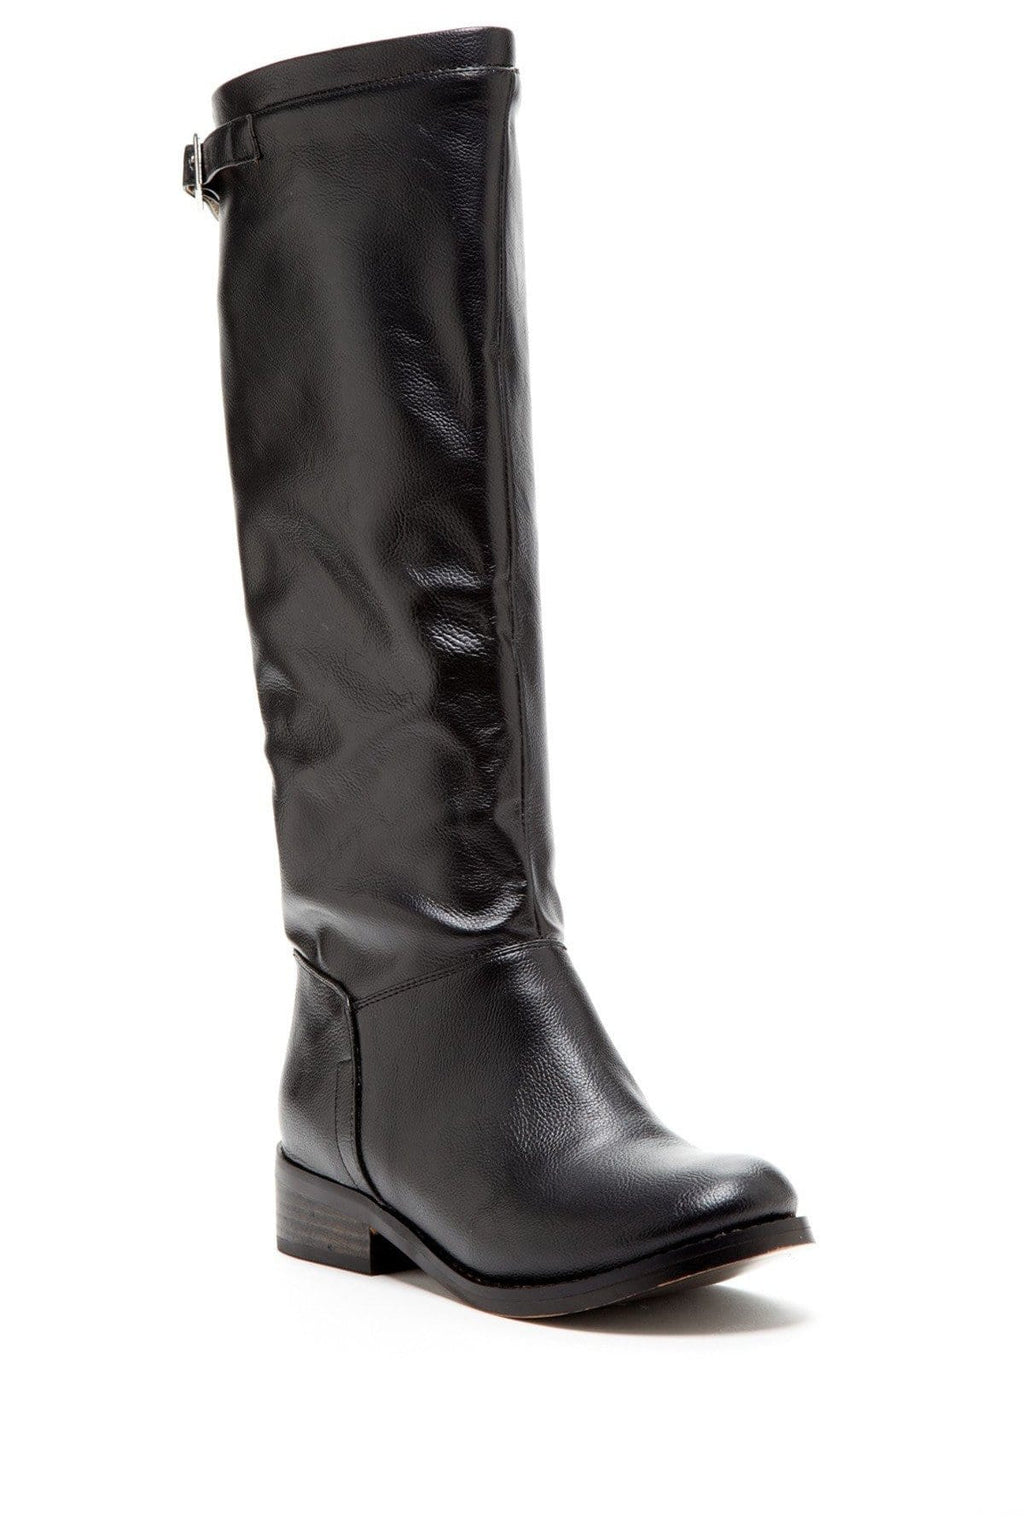 N.Y.L.A. SHOES BOOTS N.Y.L.A. Shoes Legacy Women's Flat Black Pebble Grain Leather Thigh High Boots with Buckle Detail